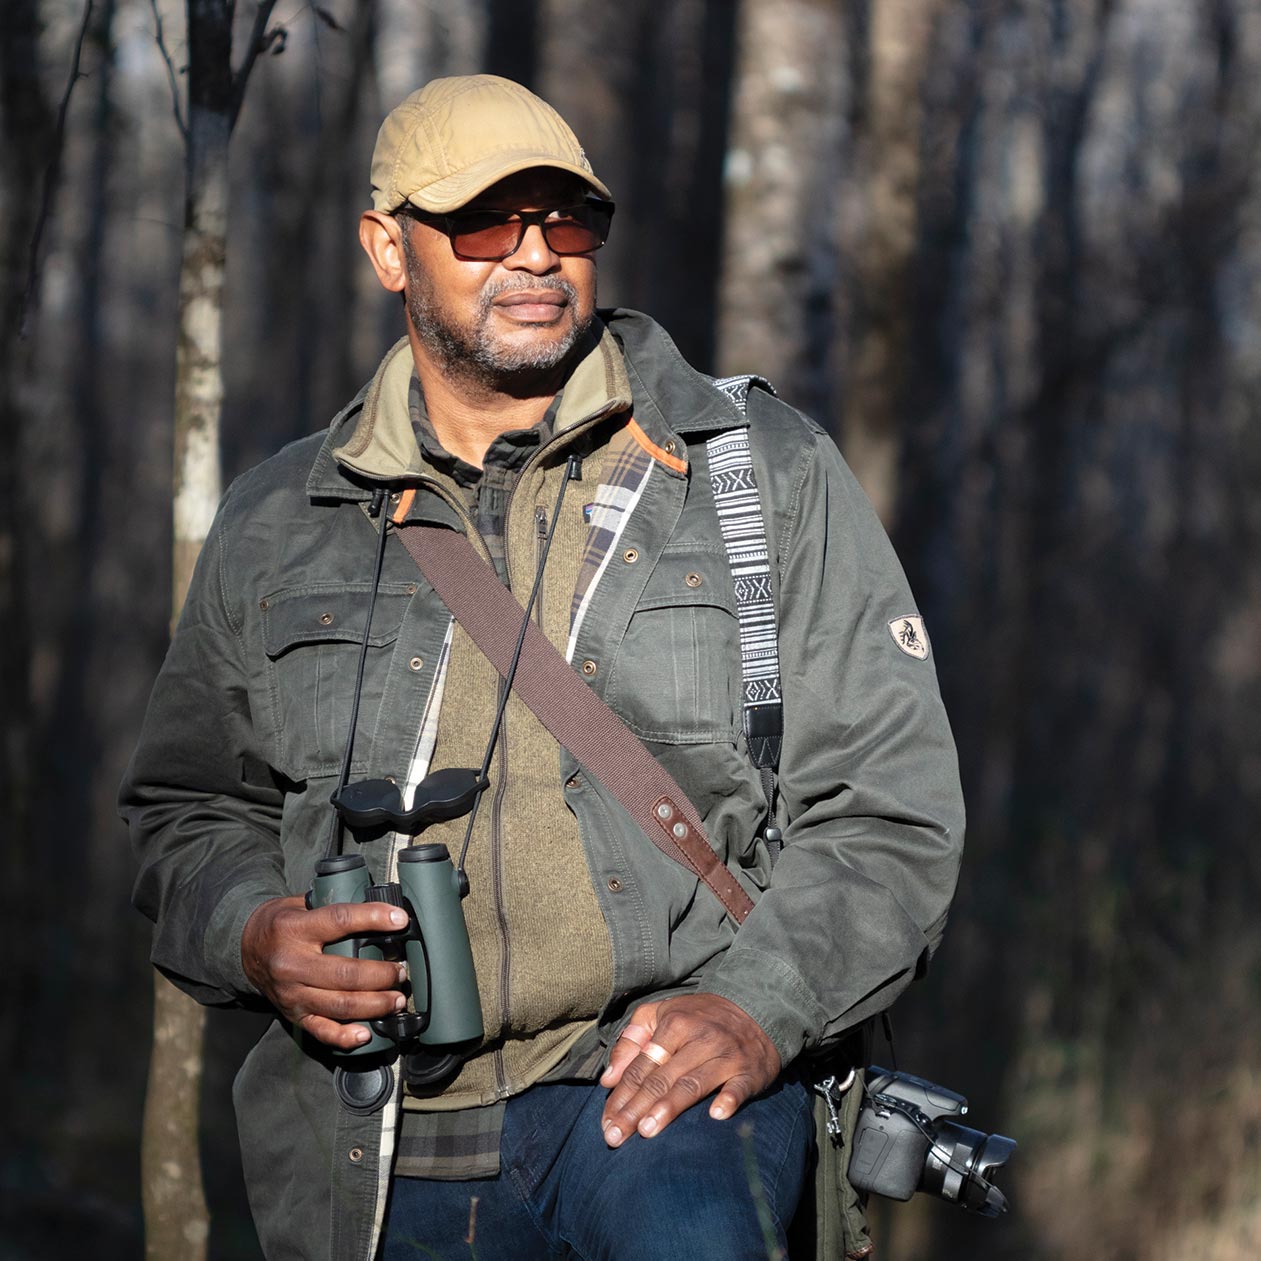 Drew Lanham (ornithologist, writer). a man holds binoculars and carries a camera in a forest setting